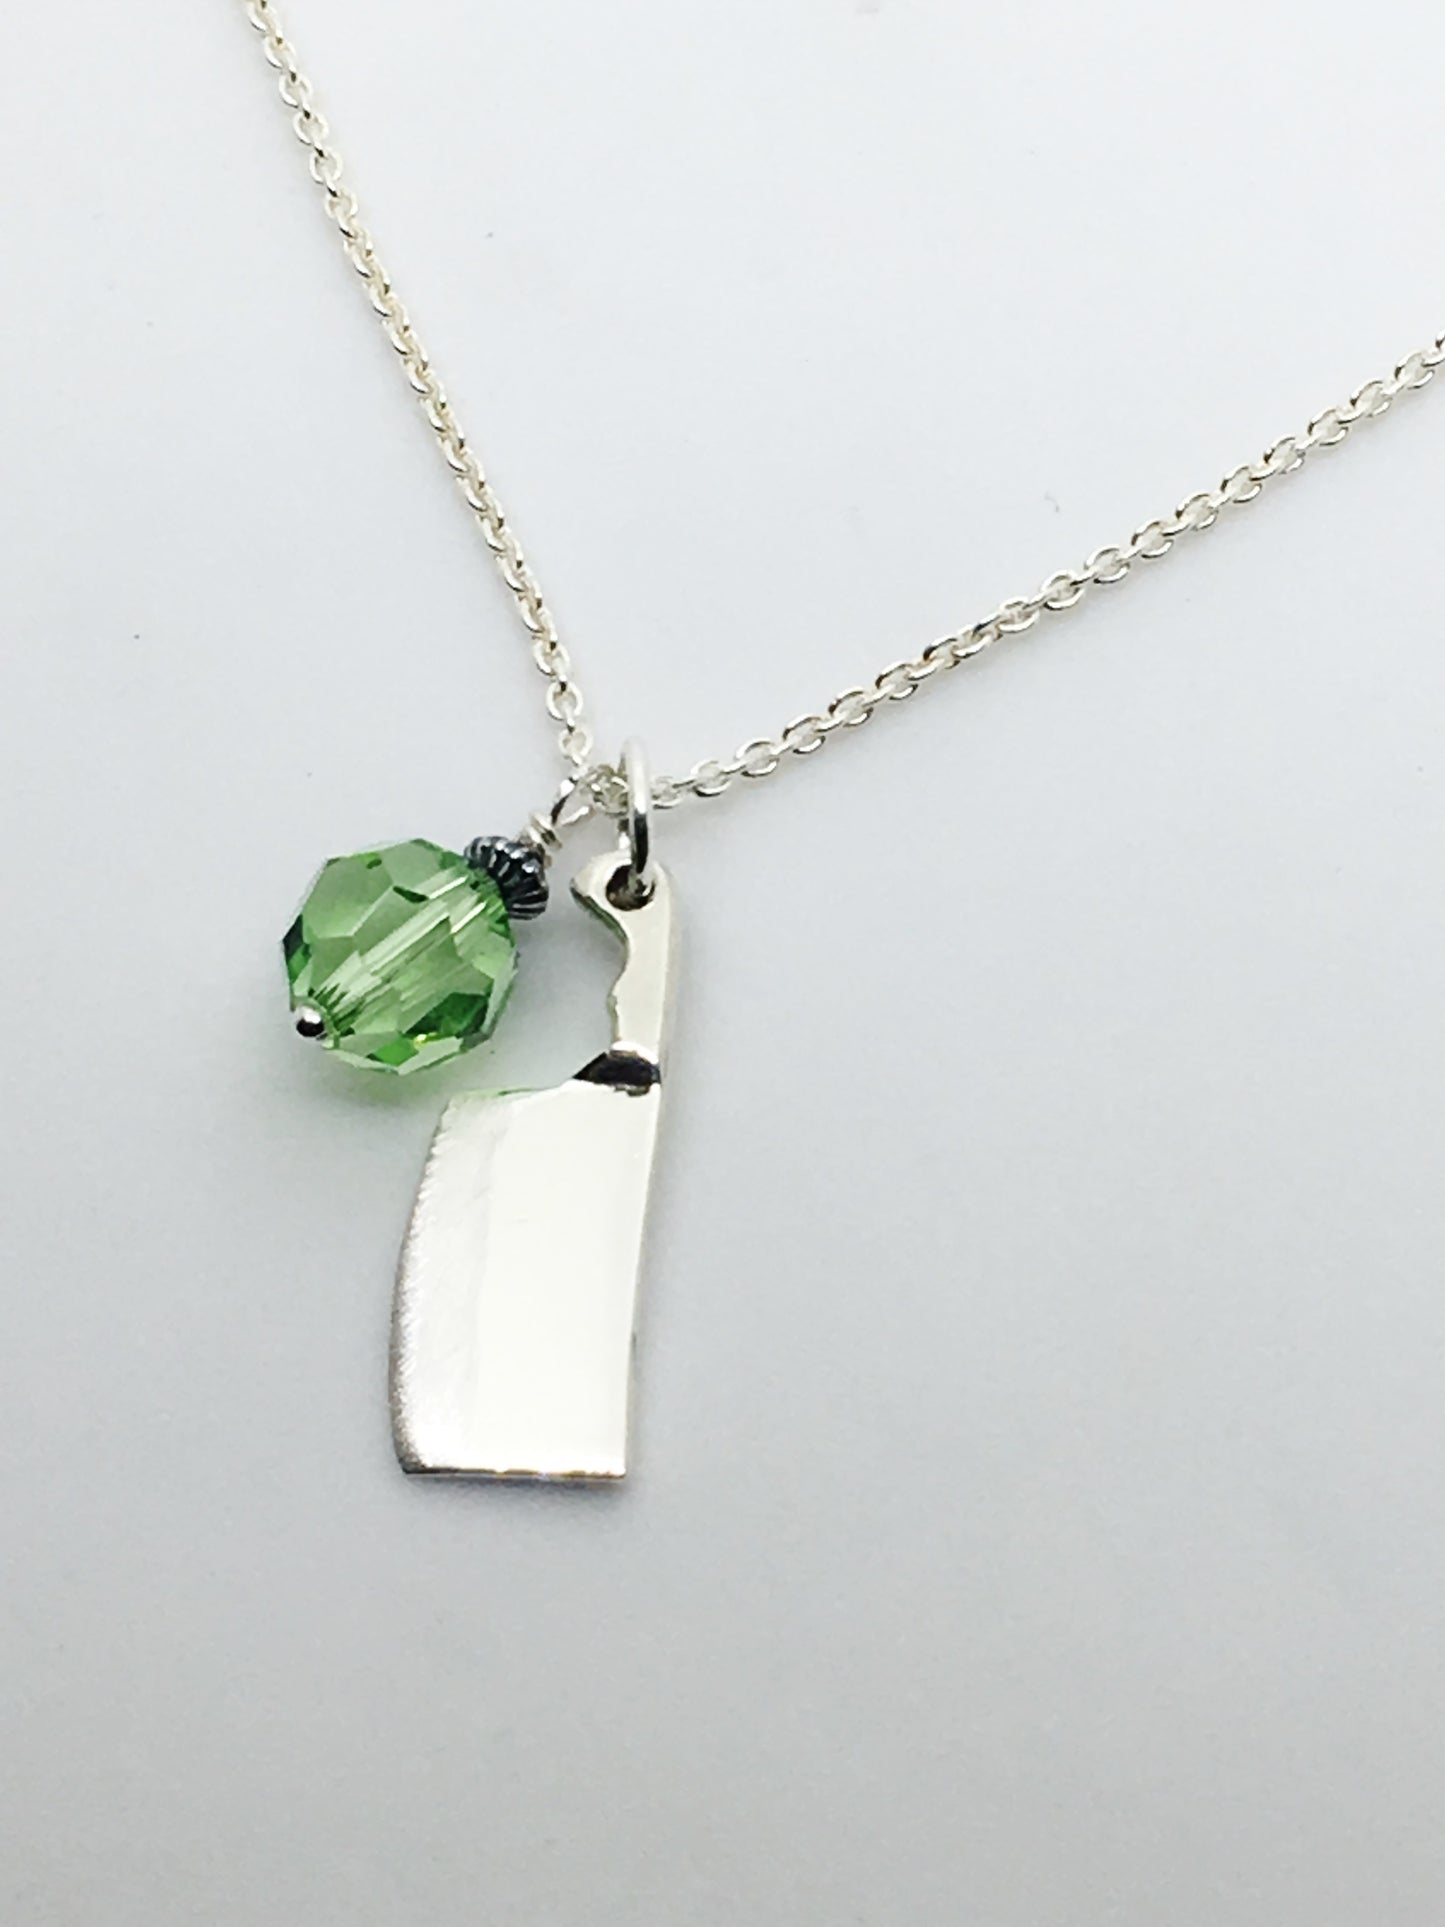 Chef's Cleaver Knife Pendant Necklace with Green Swarovski Crystal Charm